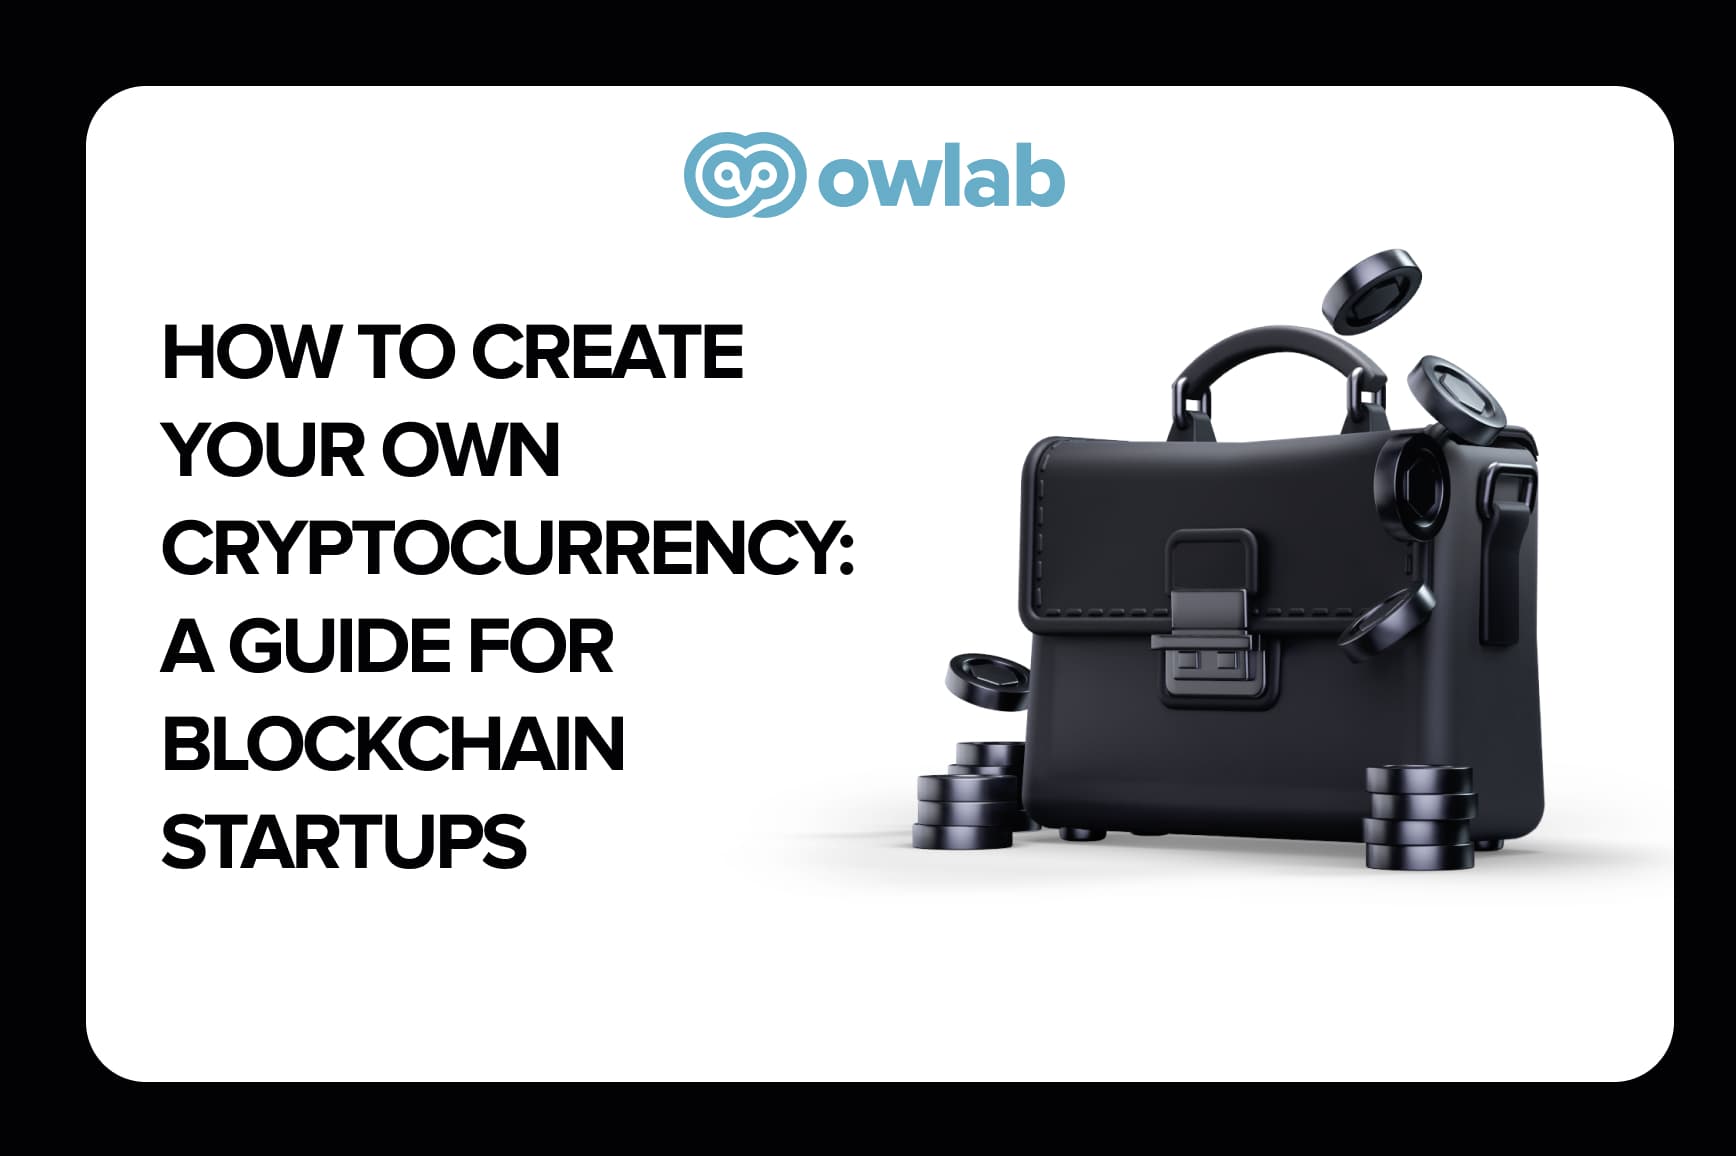 How to Create Your Own Cryptocurrency: A Guide for Blockchain Startups